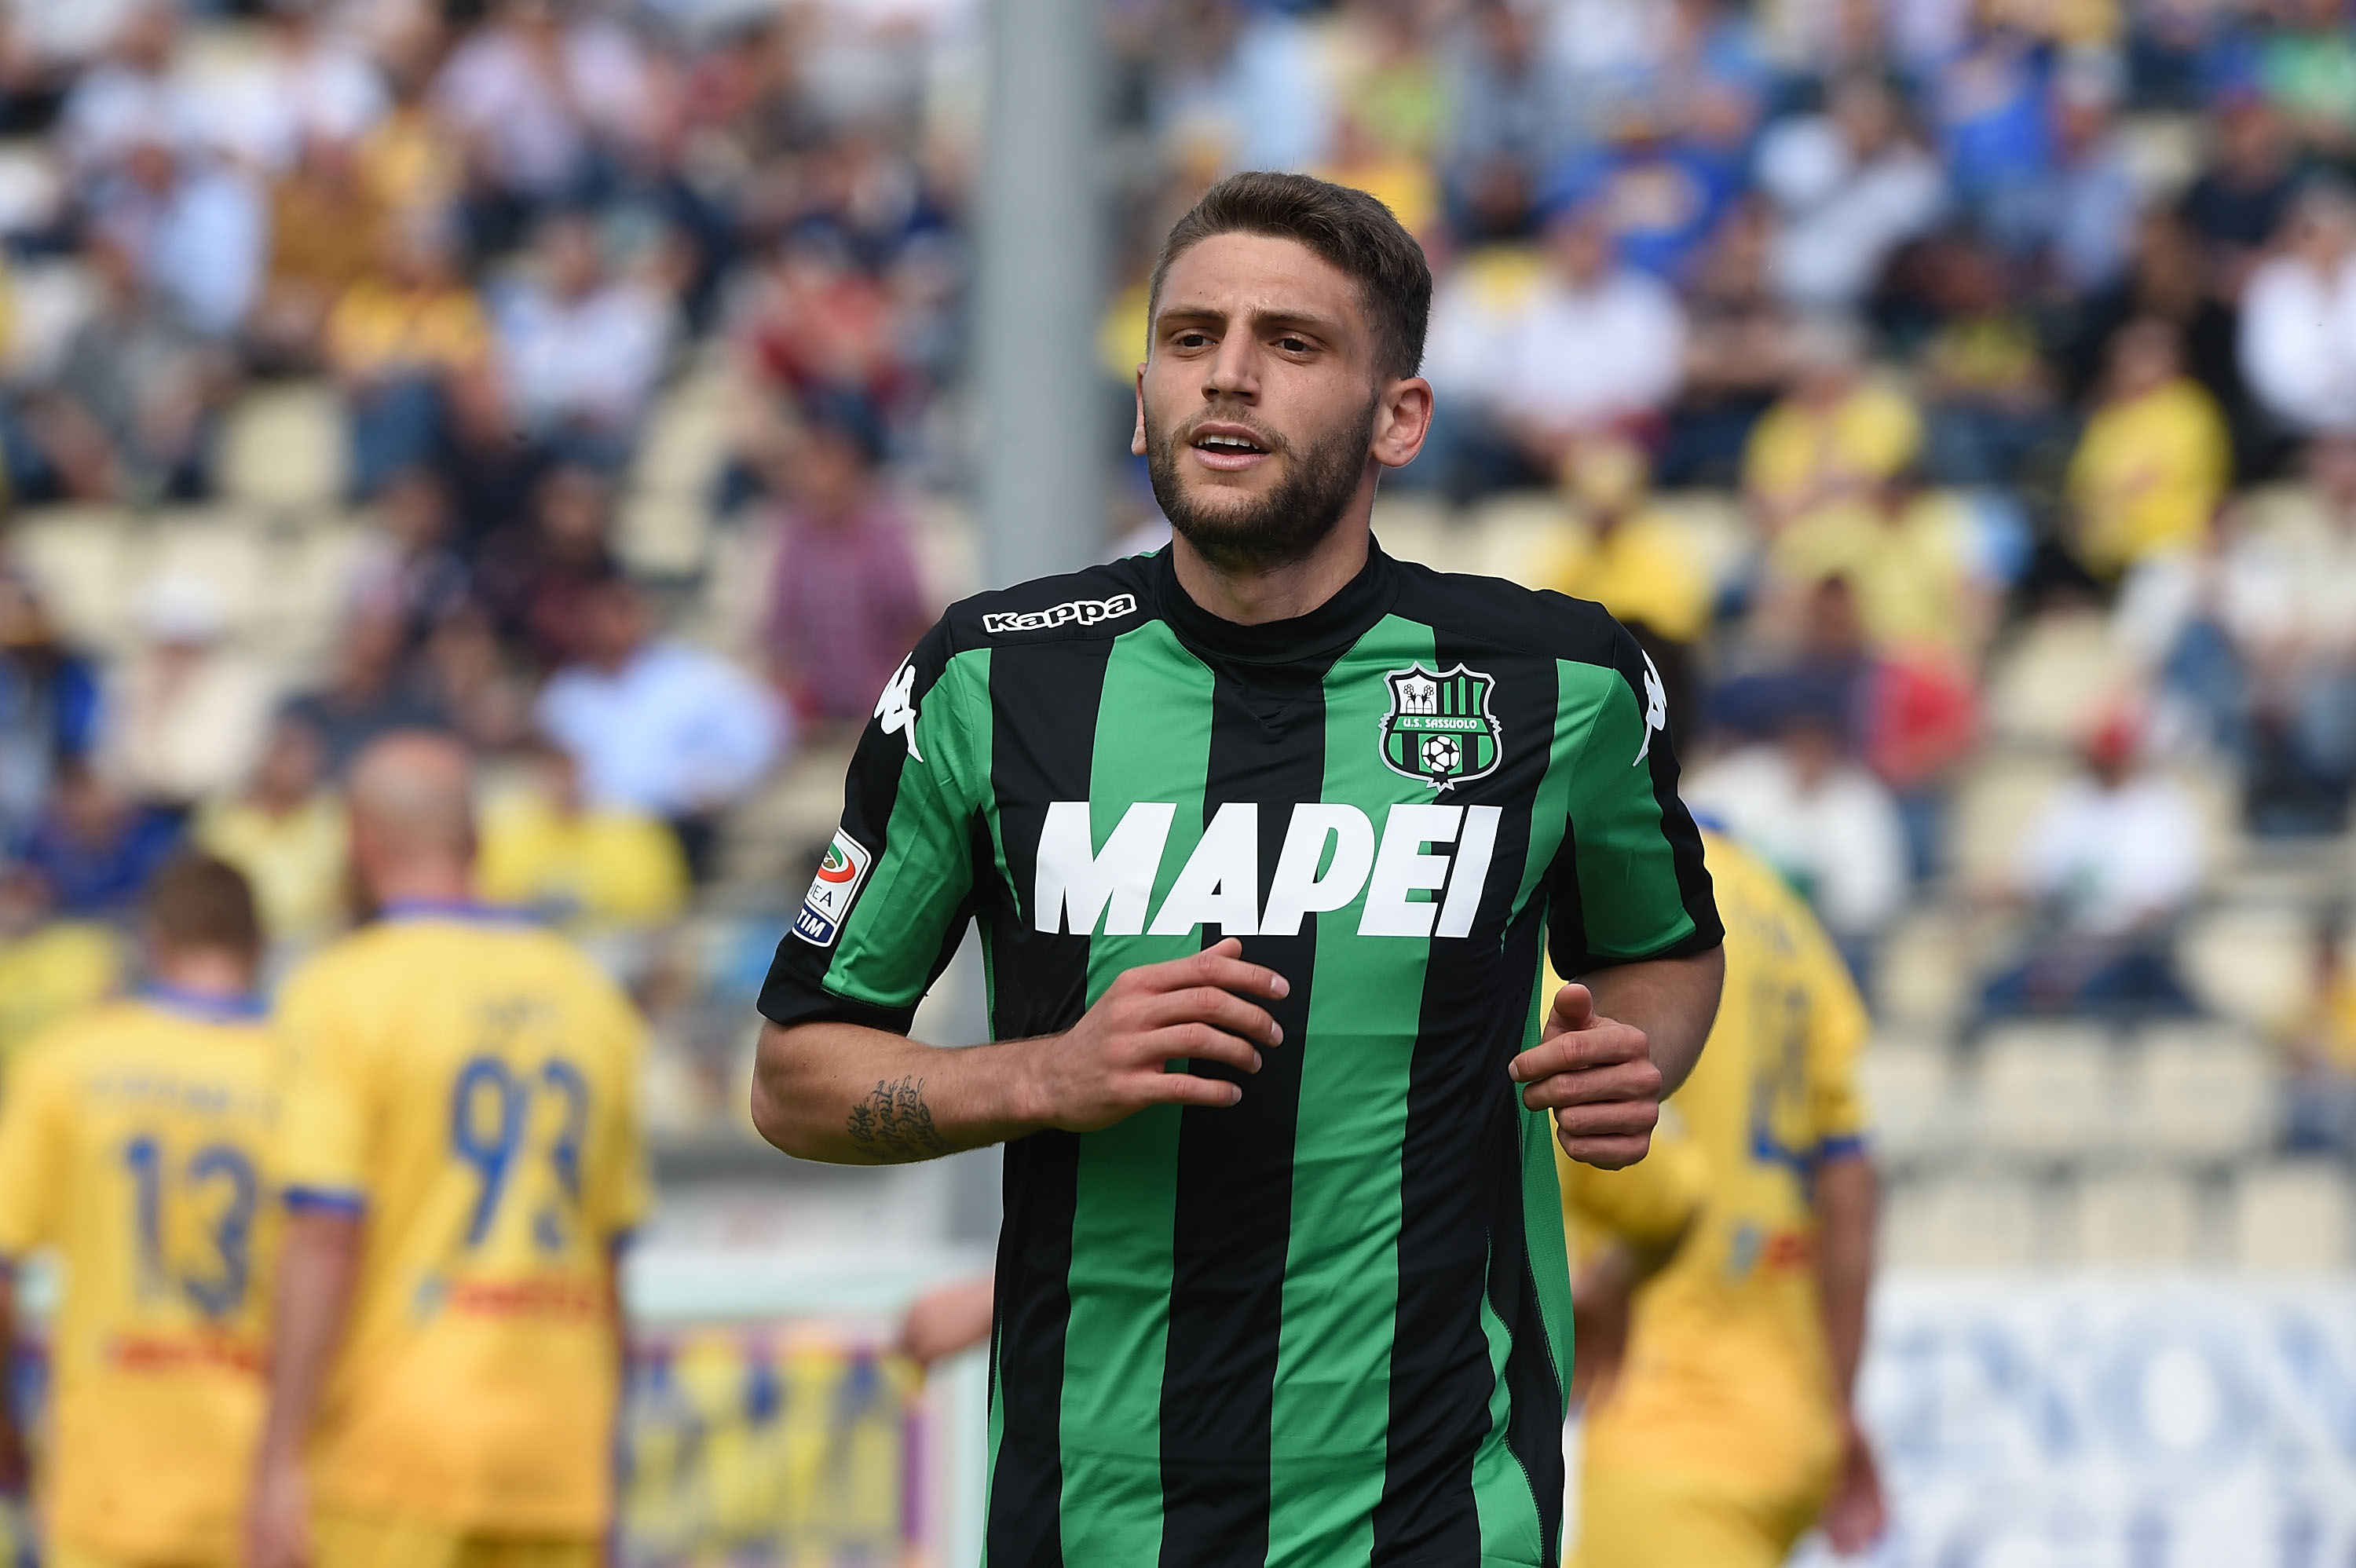 Carnevali to FCInter1908: “Duncan/Acerbi not for sale, Berardi made his choice, Juve can’t influence us”